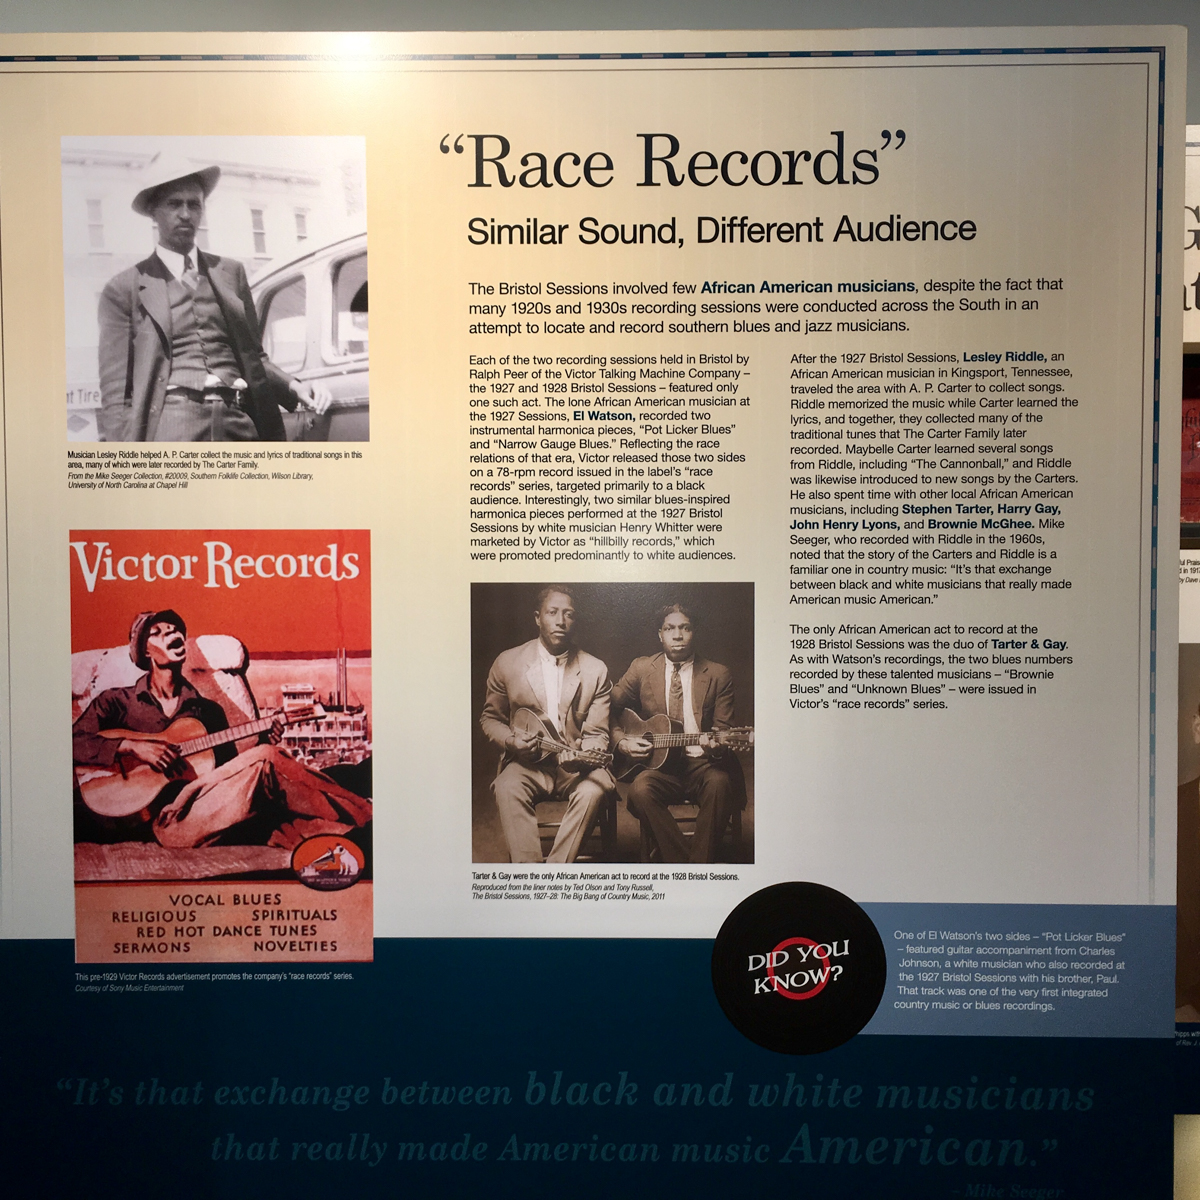 African American History in a Country Music Museum? Exhibits and Programs Explore the Connections